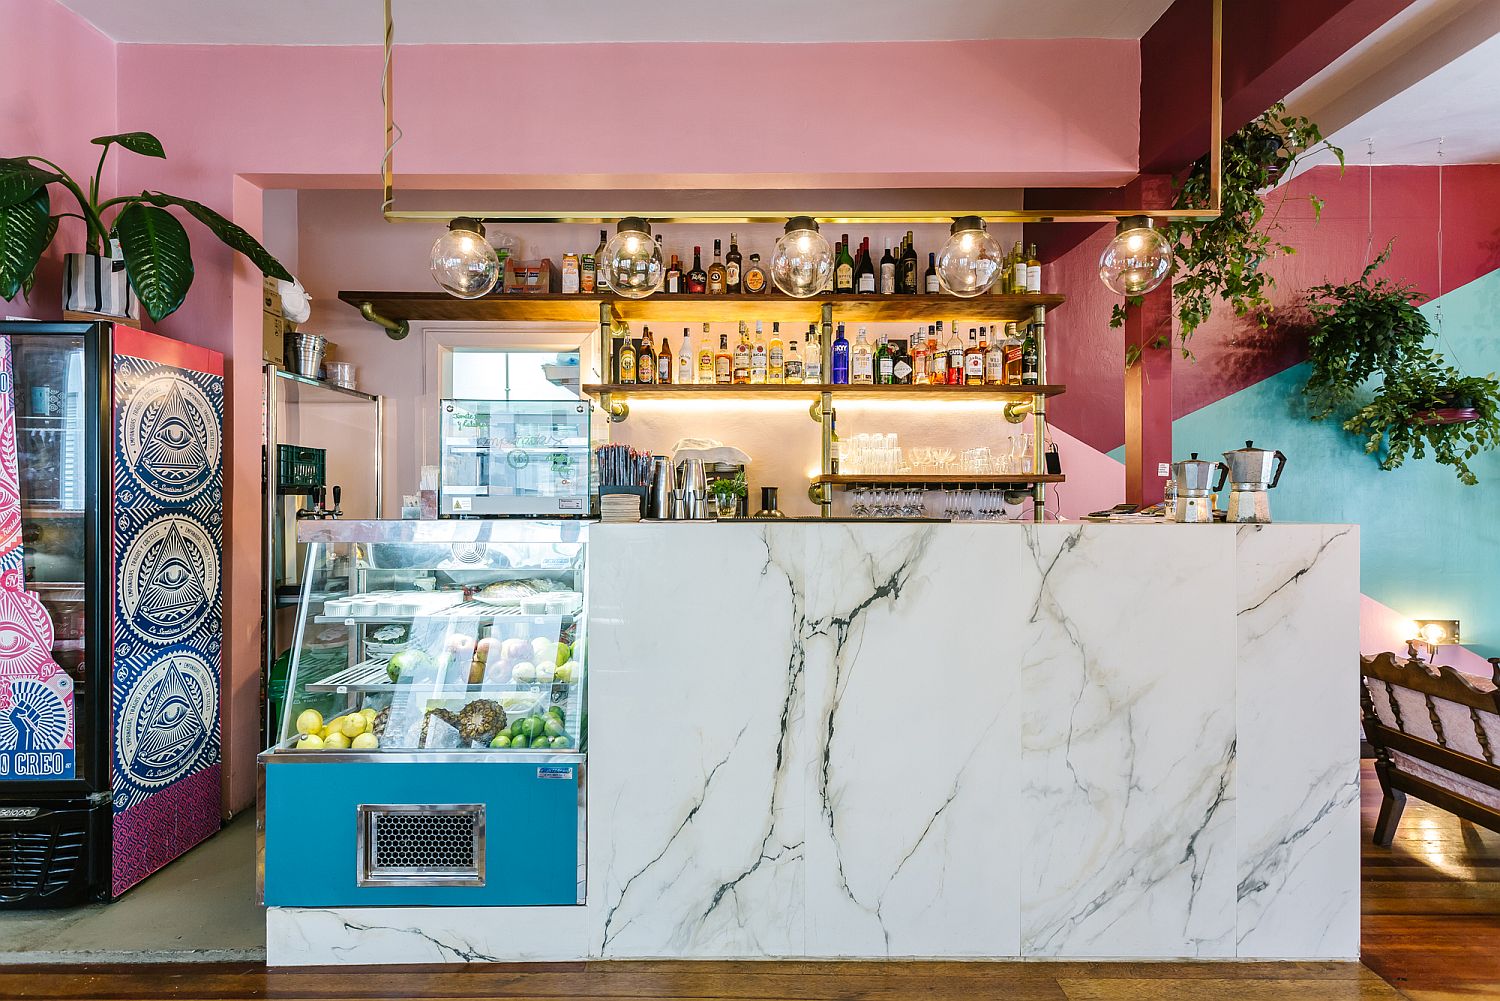 Marble and pink create a lovely and vivacious cafe interior